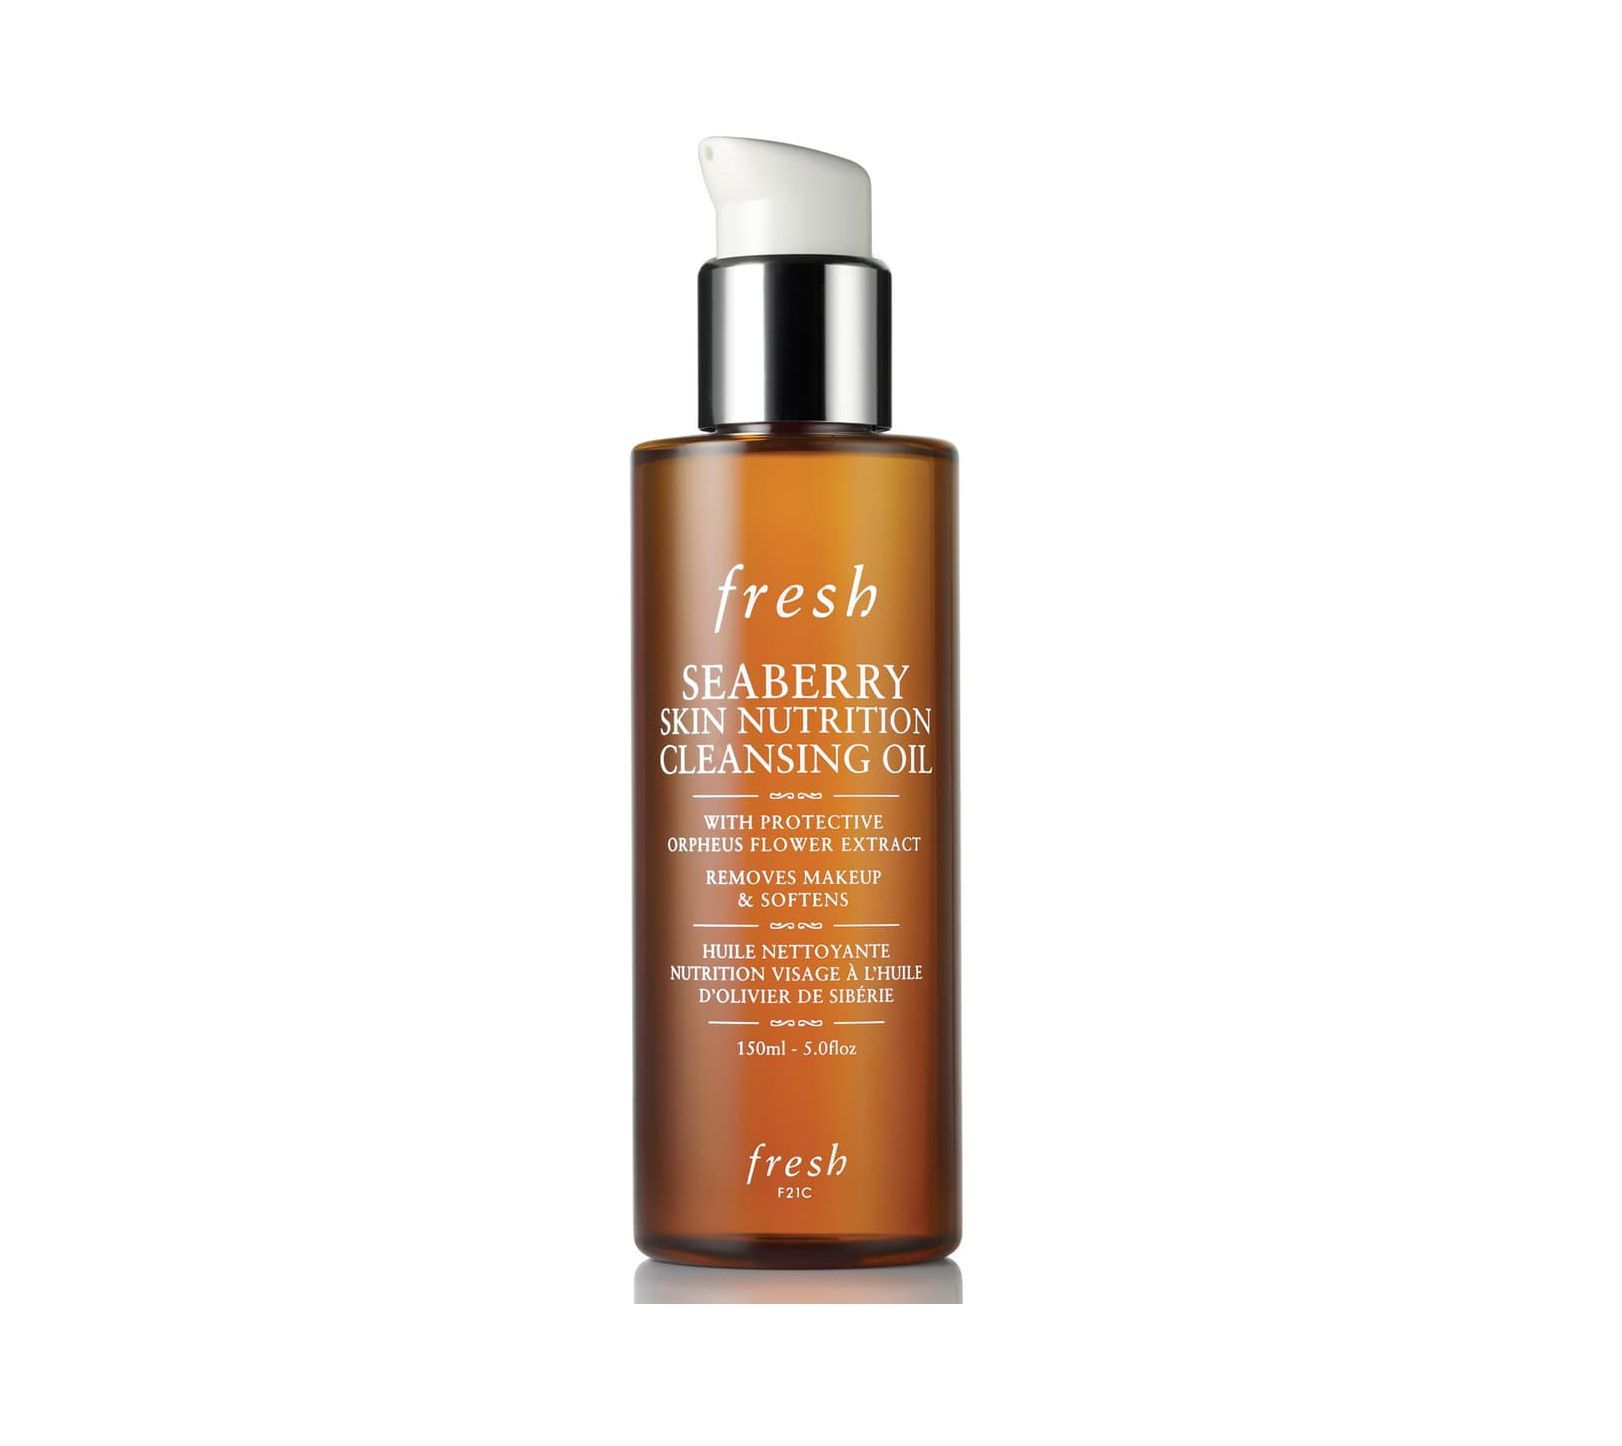 Fresh Seaberry Cleansing Oil